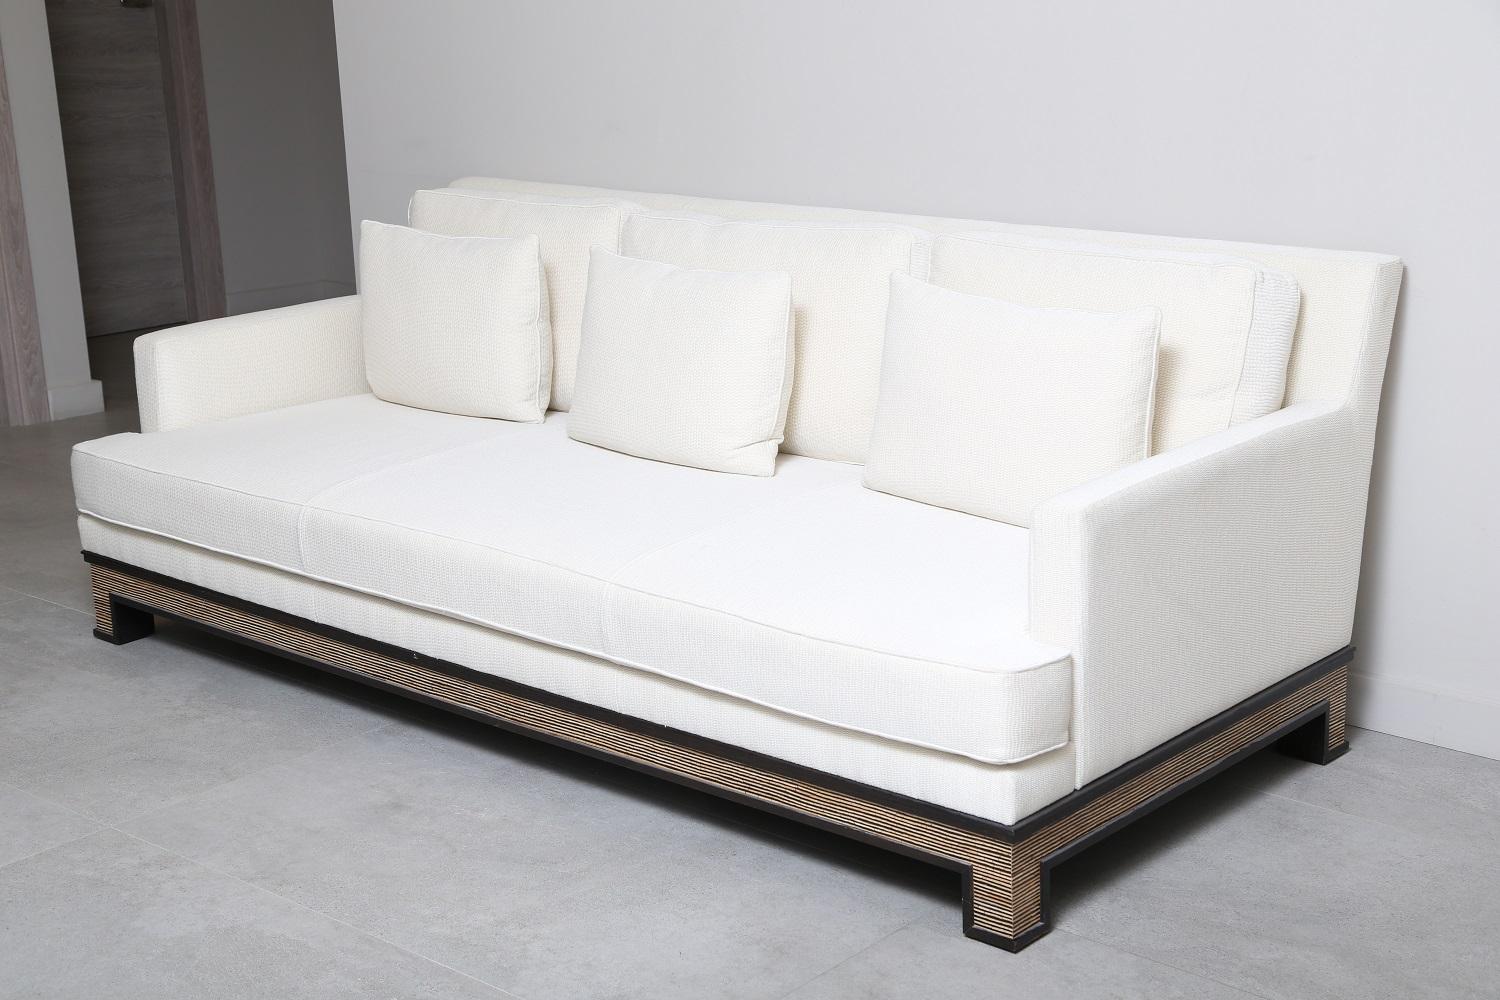 Upholstered sofa. Beech frame and solid oak base, Inserts of coco-shell, mosaic of coco and shells.
One seat cushion, three back cushions and three soft pillows. Made in France.

Dimensions
Height : 31.50”
Seat height : 14.56”
Width :